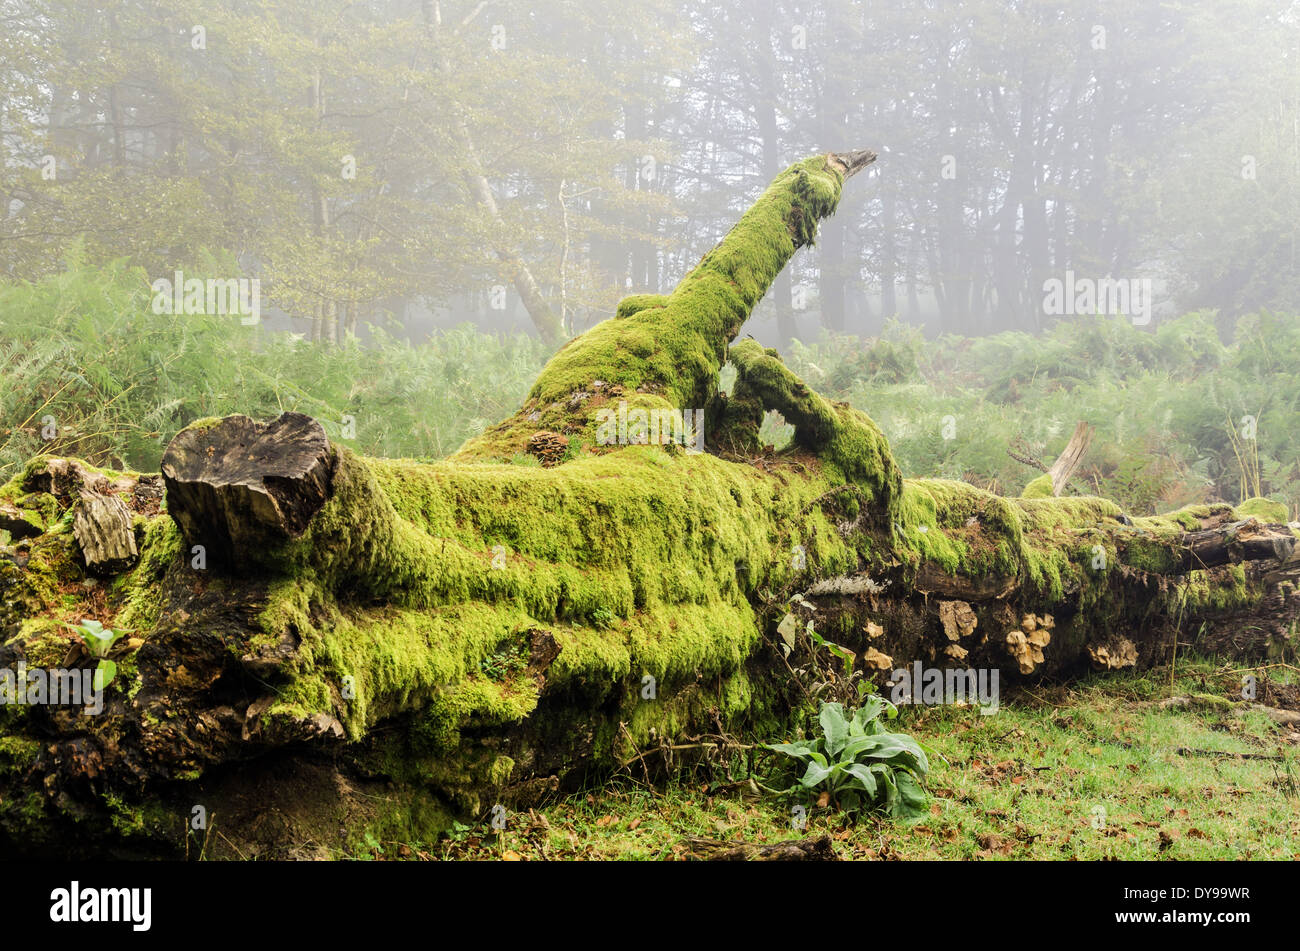 Old stump in the forest Stock Photo